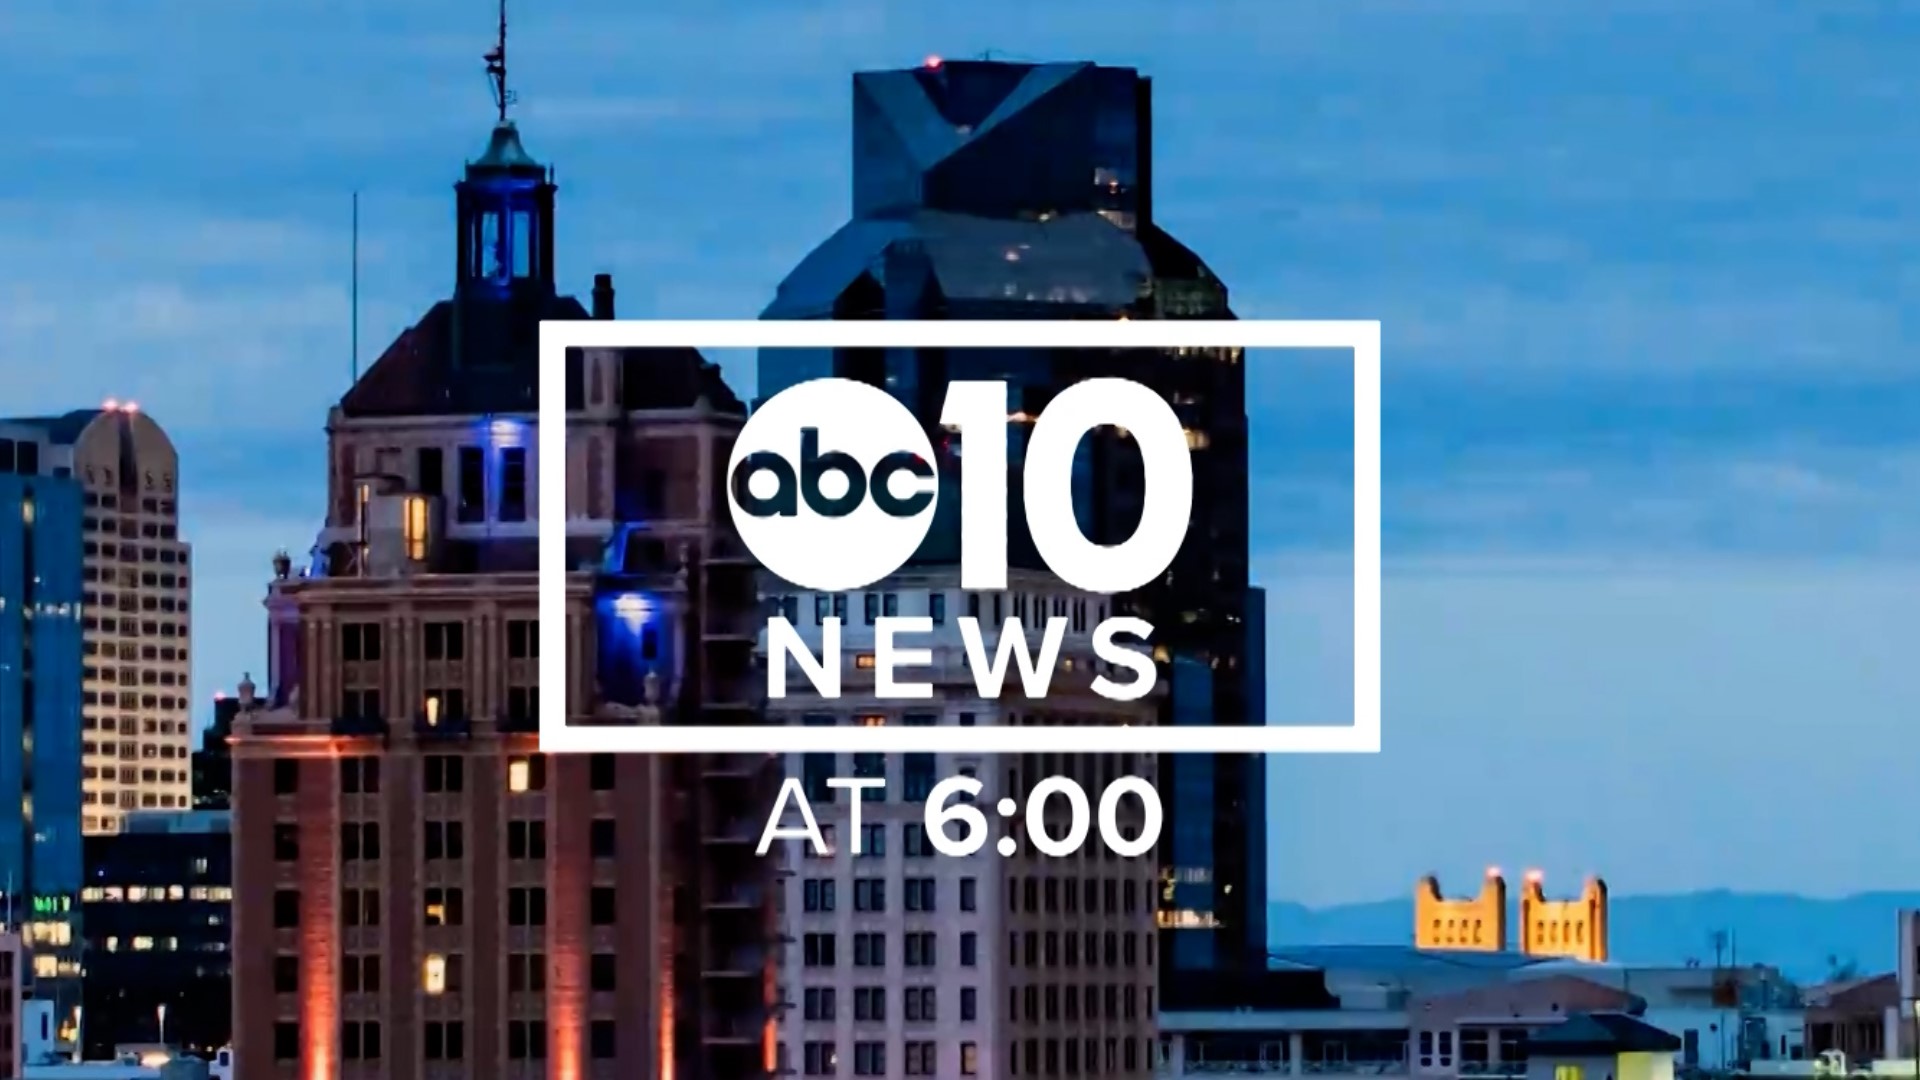 The ABC10 News team has the latest local news and weather, including a recap of everything that happened today in our communities.